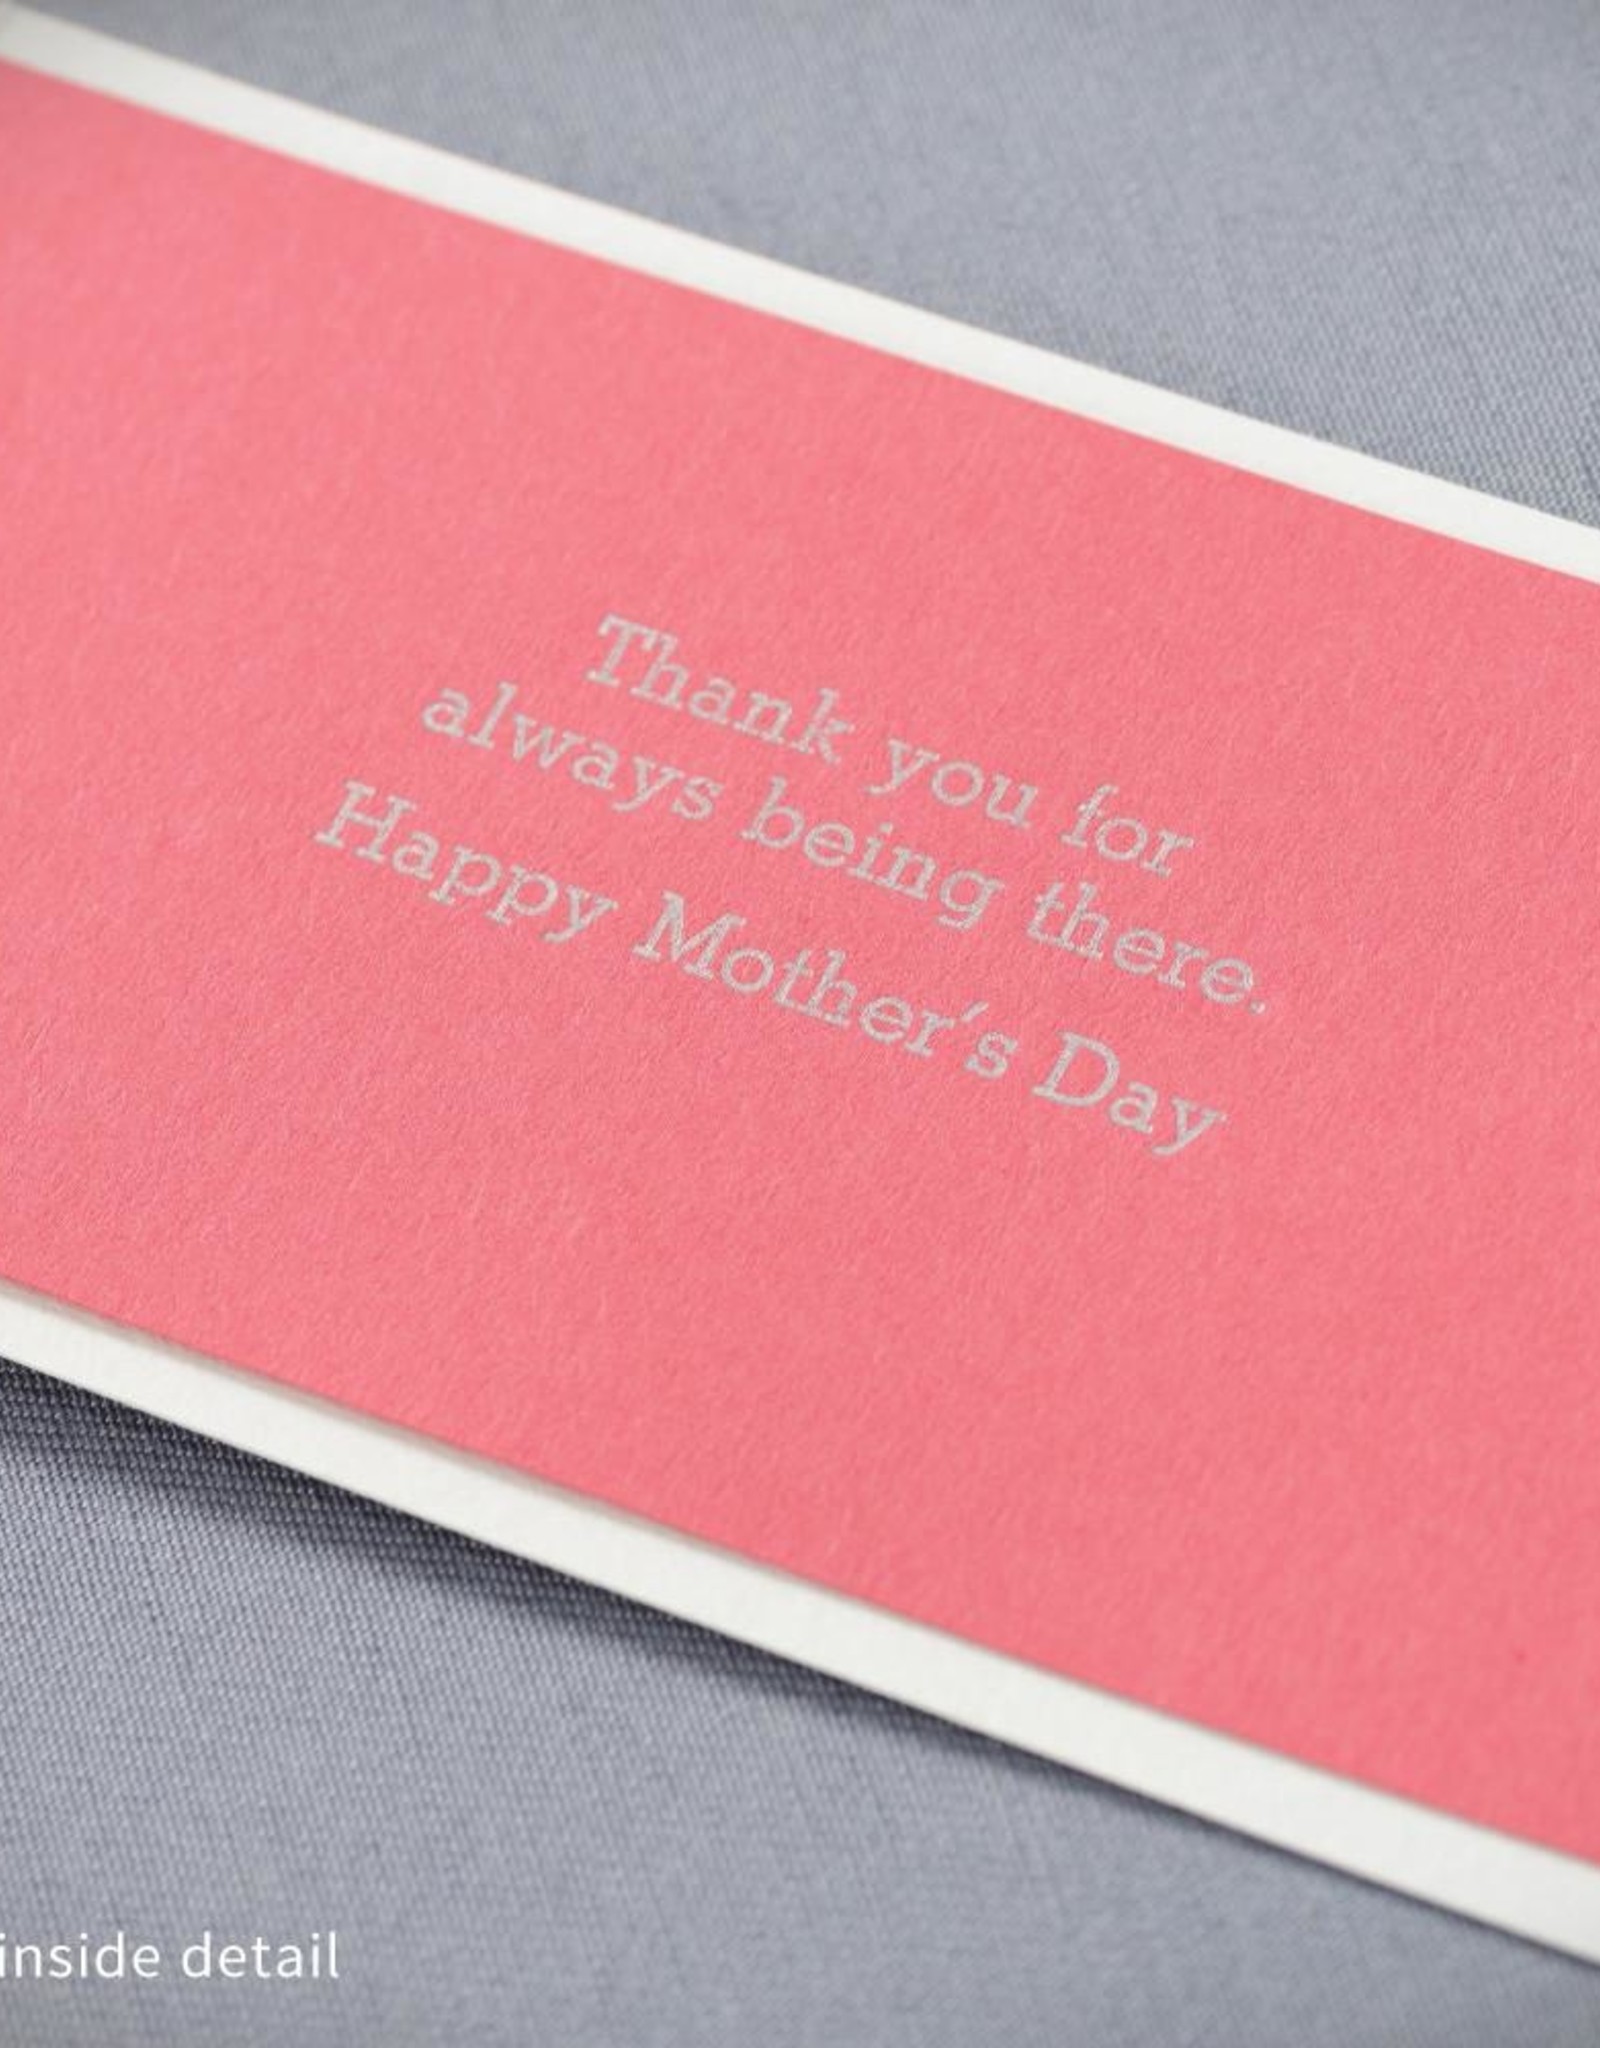 Inkello Assorted Mother's Day Cards by Inkello